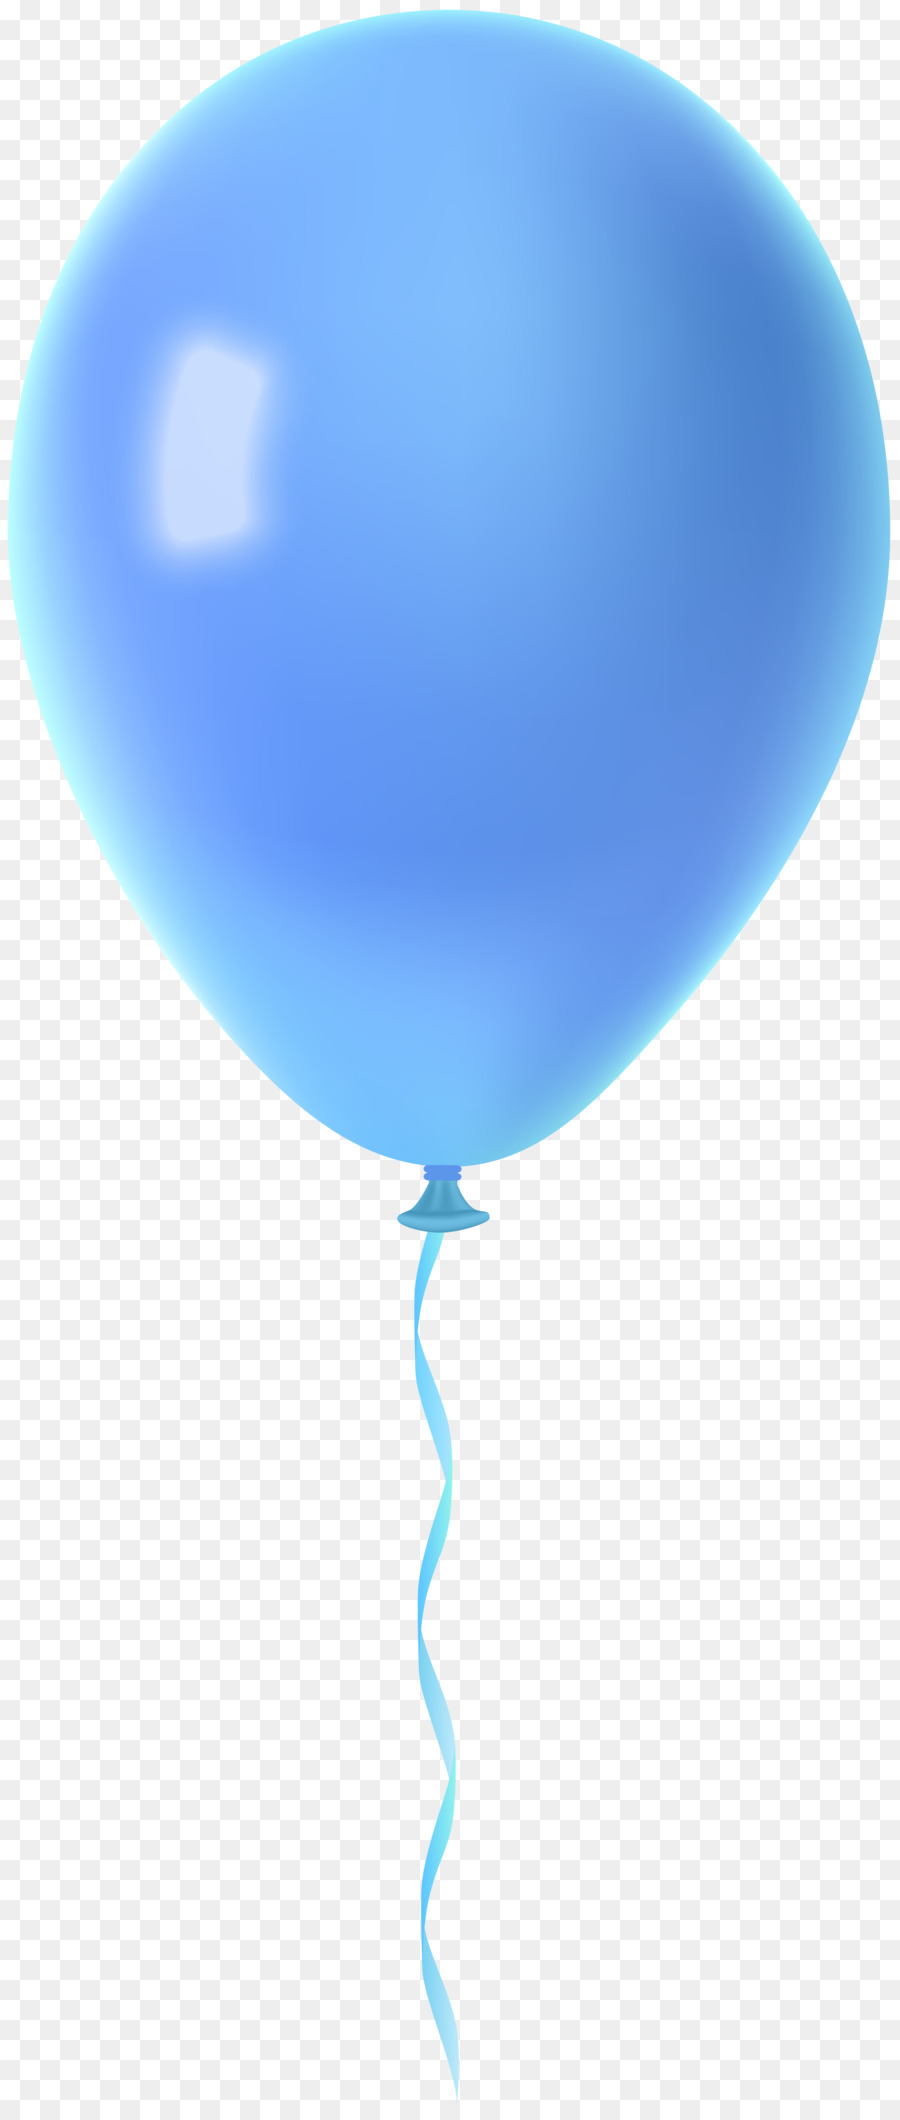 Balloon Blue Clip art - Yellow And Blue balloons png download - 3413*8000 - Free Transparent Balloon png Download.